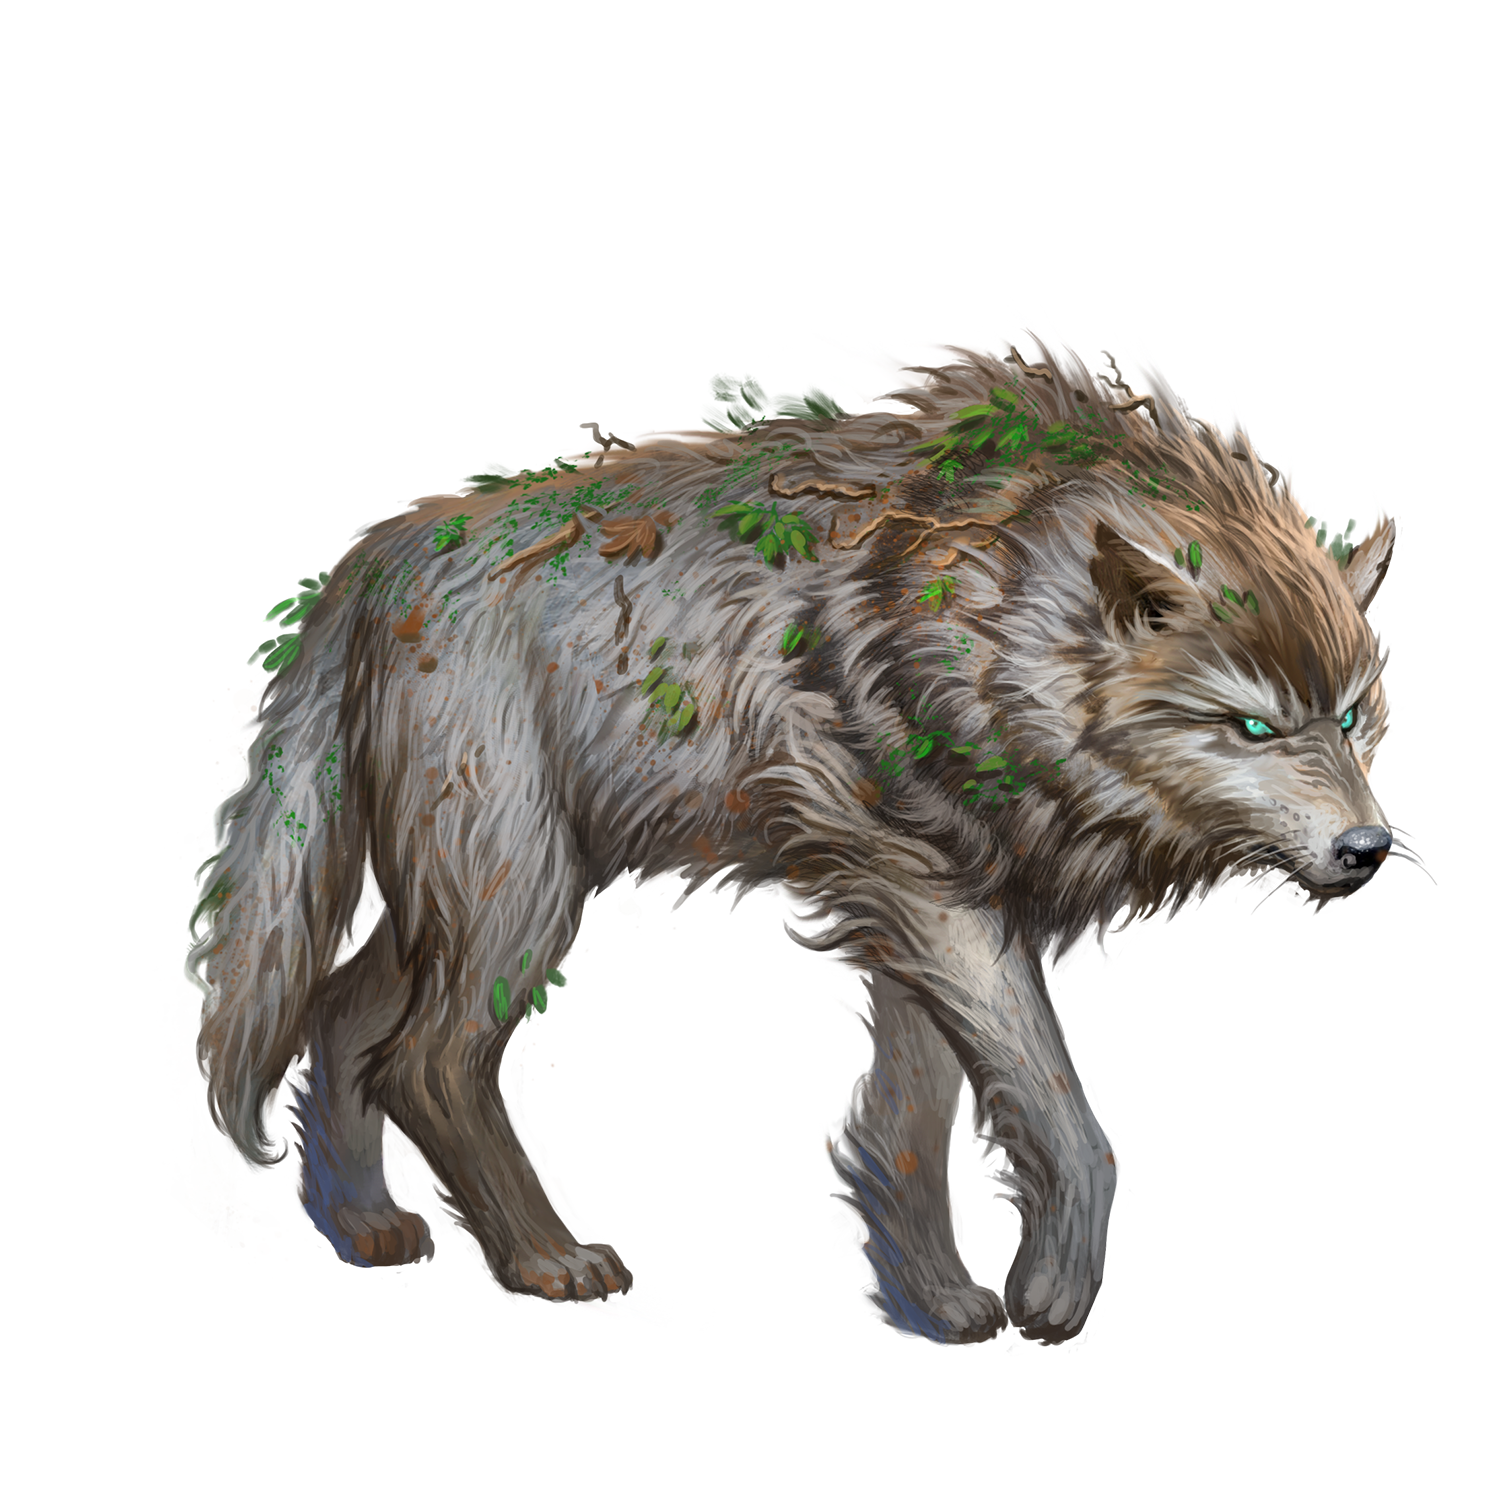 This image is of a full-sized wolf. It’s large enough for Fairel to ride. Its coat is mostly gray, but it has some brown/red highlights. It too looks like it has rolled around in the underbrush a bit, as it has leaves and twigs caught in its fur. On its neck, it also has a mystical symbol, like three comets trailing each other. The wolf has a fierce expression, but it isn’t actively snarling. Color palette focus here is on greens and warm browns.